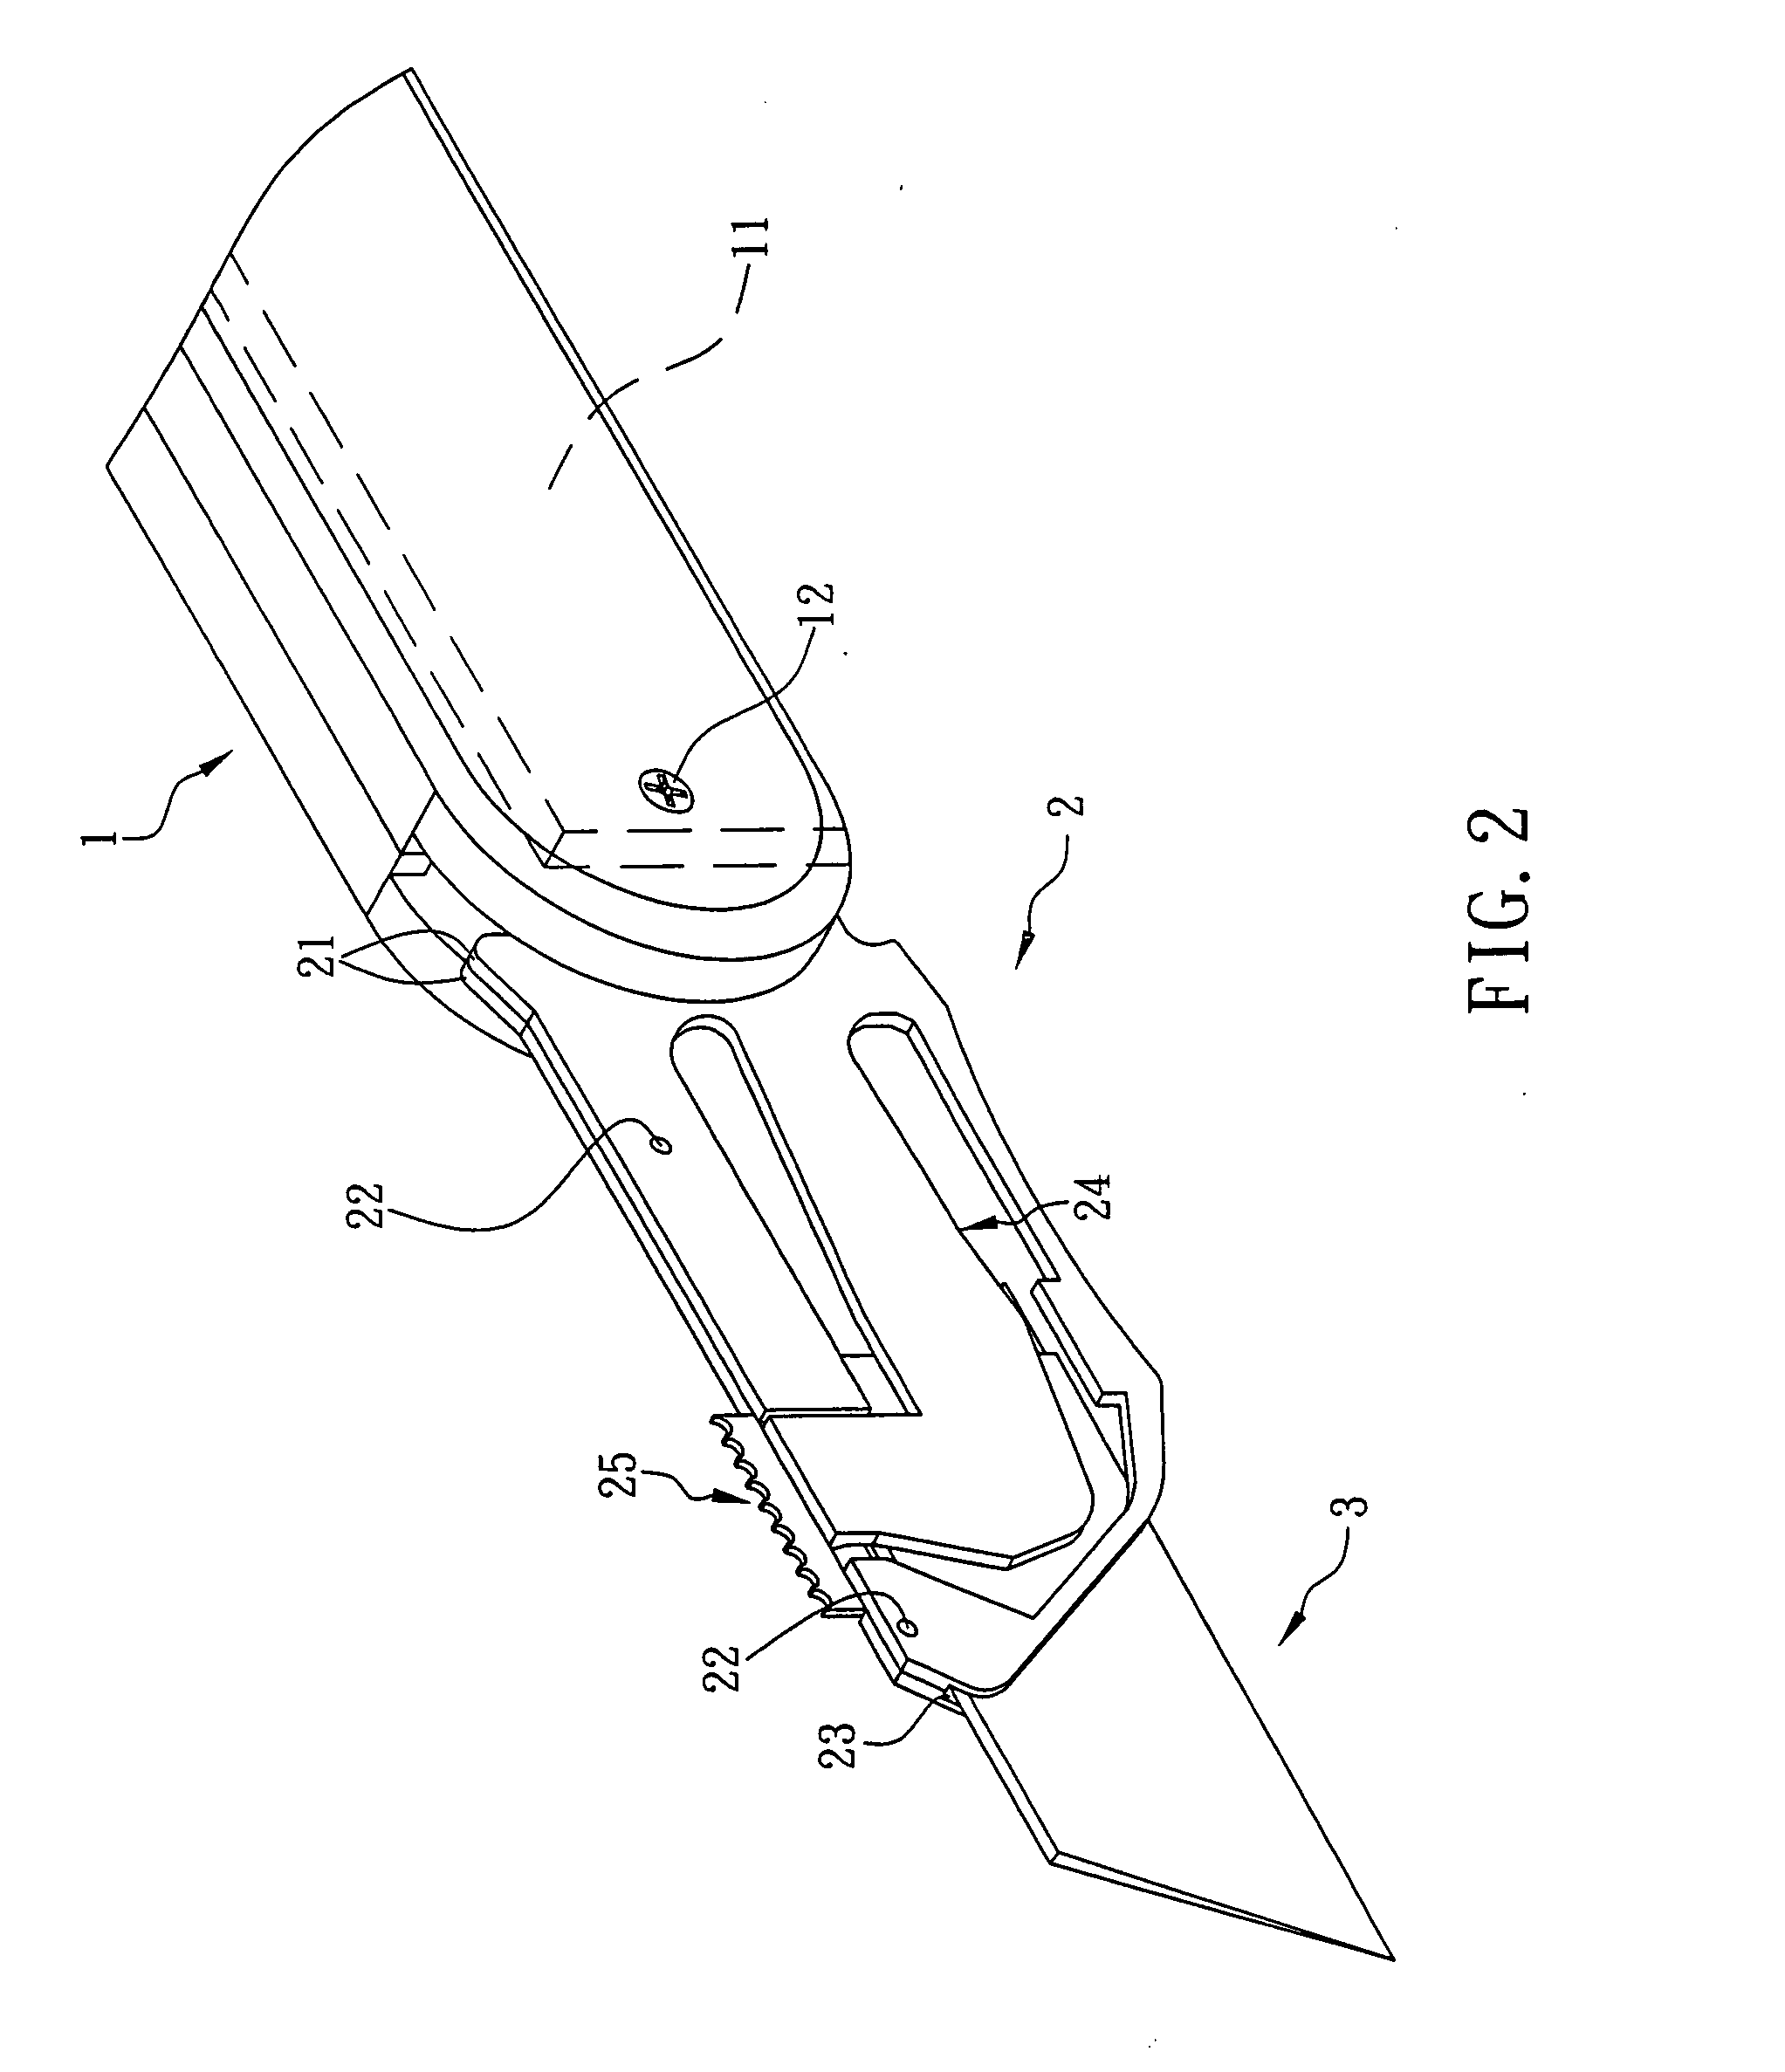 Folding knife with blade replacement mechanism